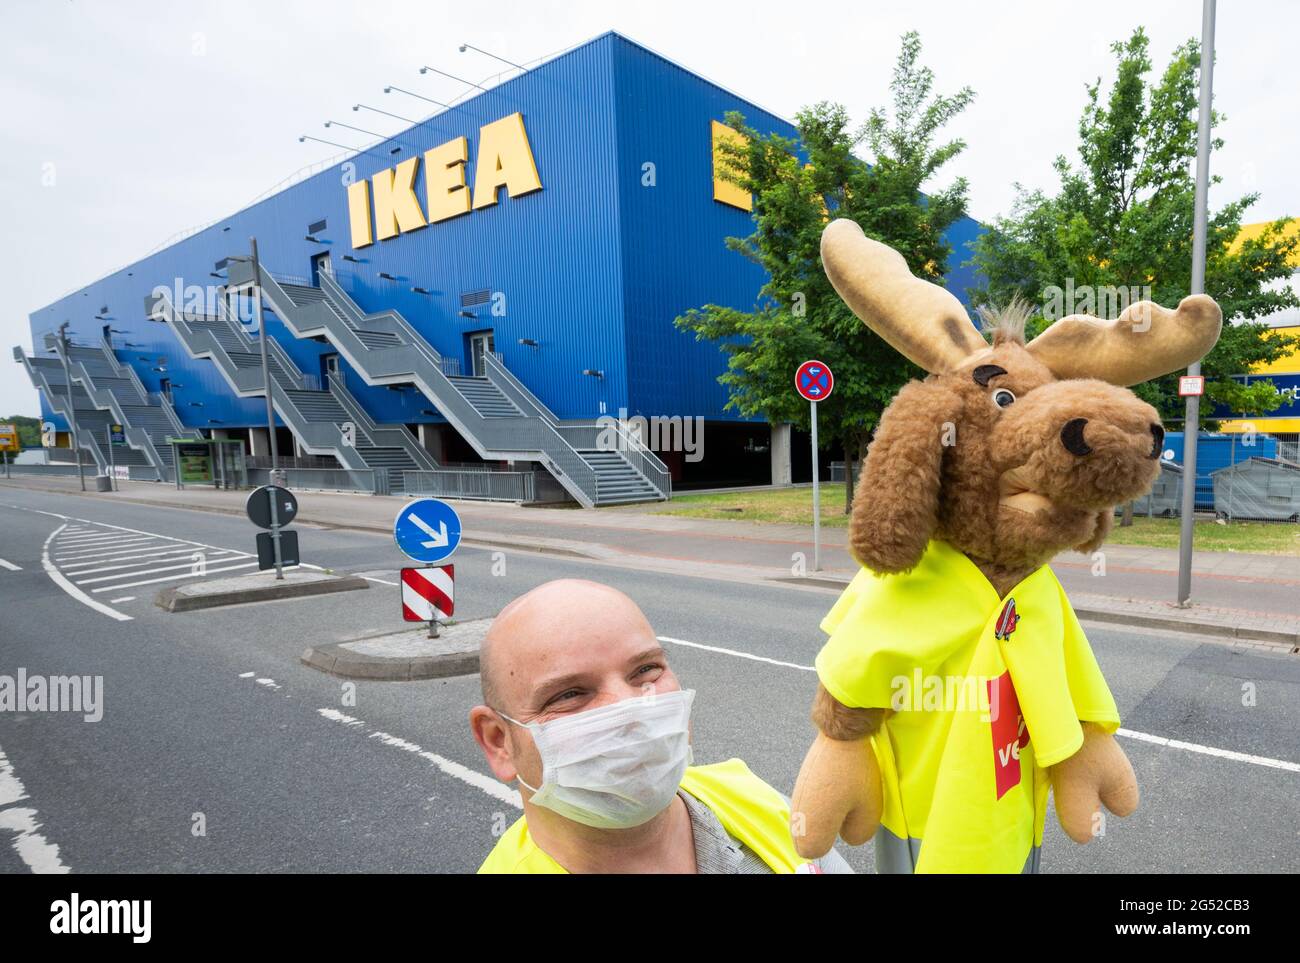 Hanover, Germany. 25th June, 2021. An employee of the furniture store chain  Ikea stands with a cloth cup during a strike in front of the Ikea Expo  Park. The trade union Verdi